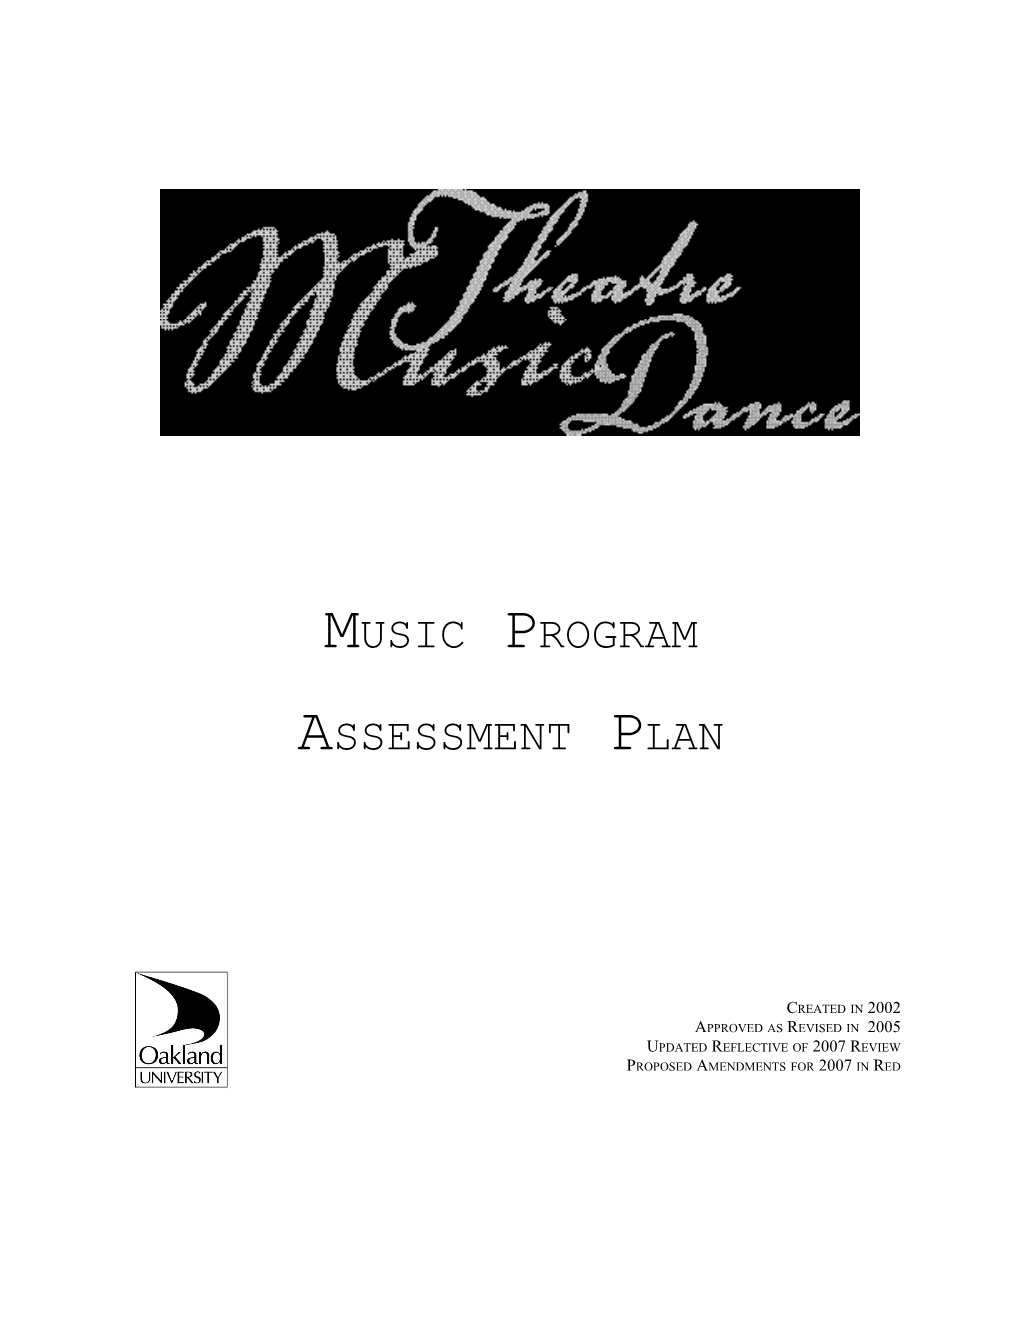 Music Assessment Plan Approved As Revised 2005P. 1